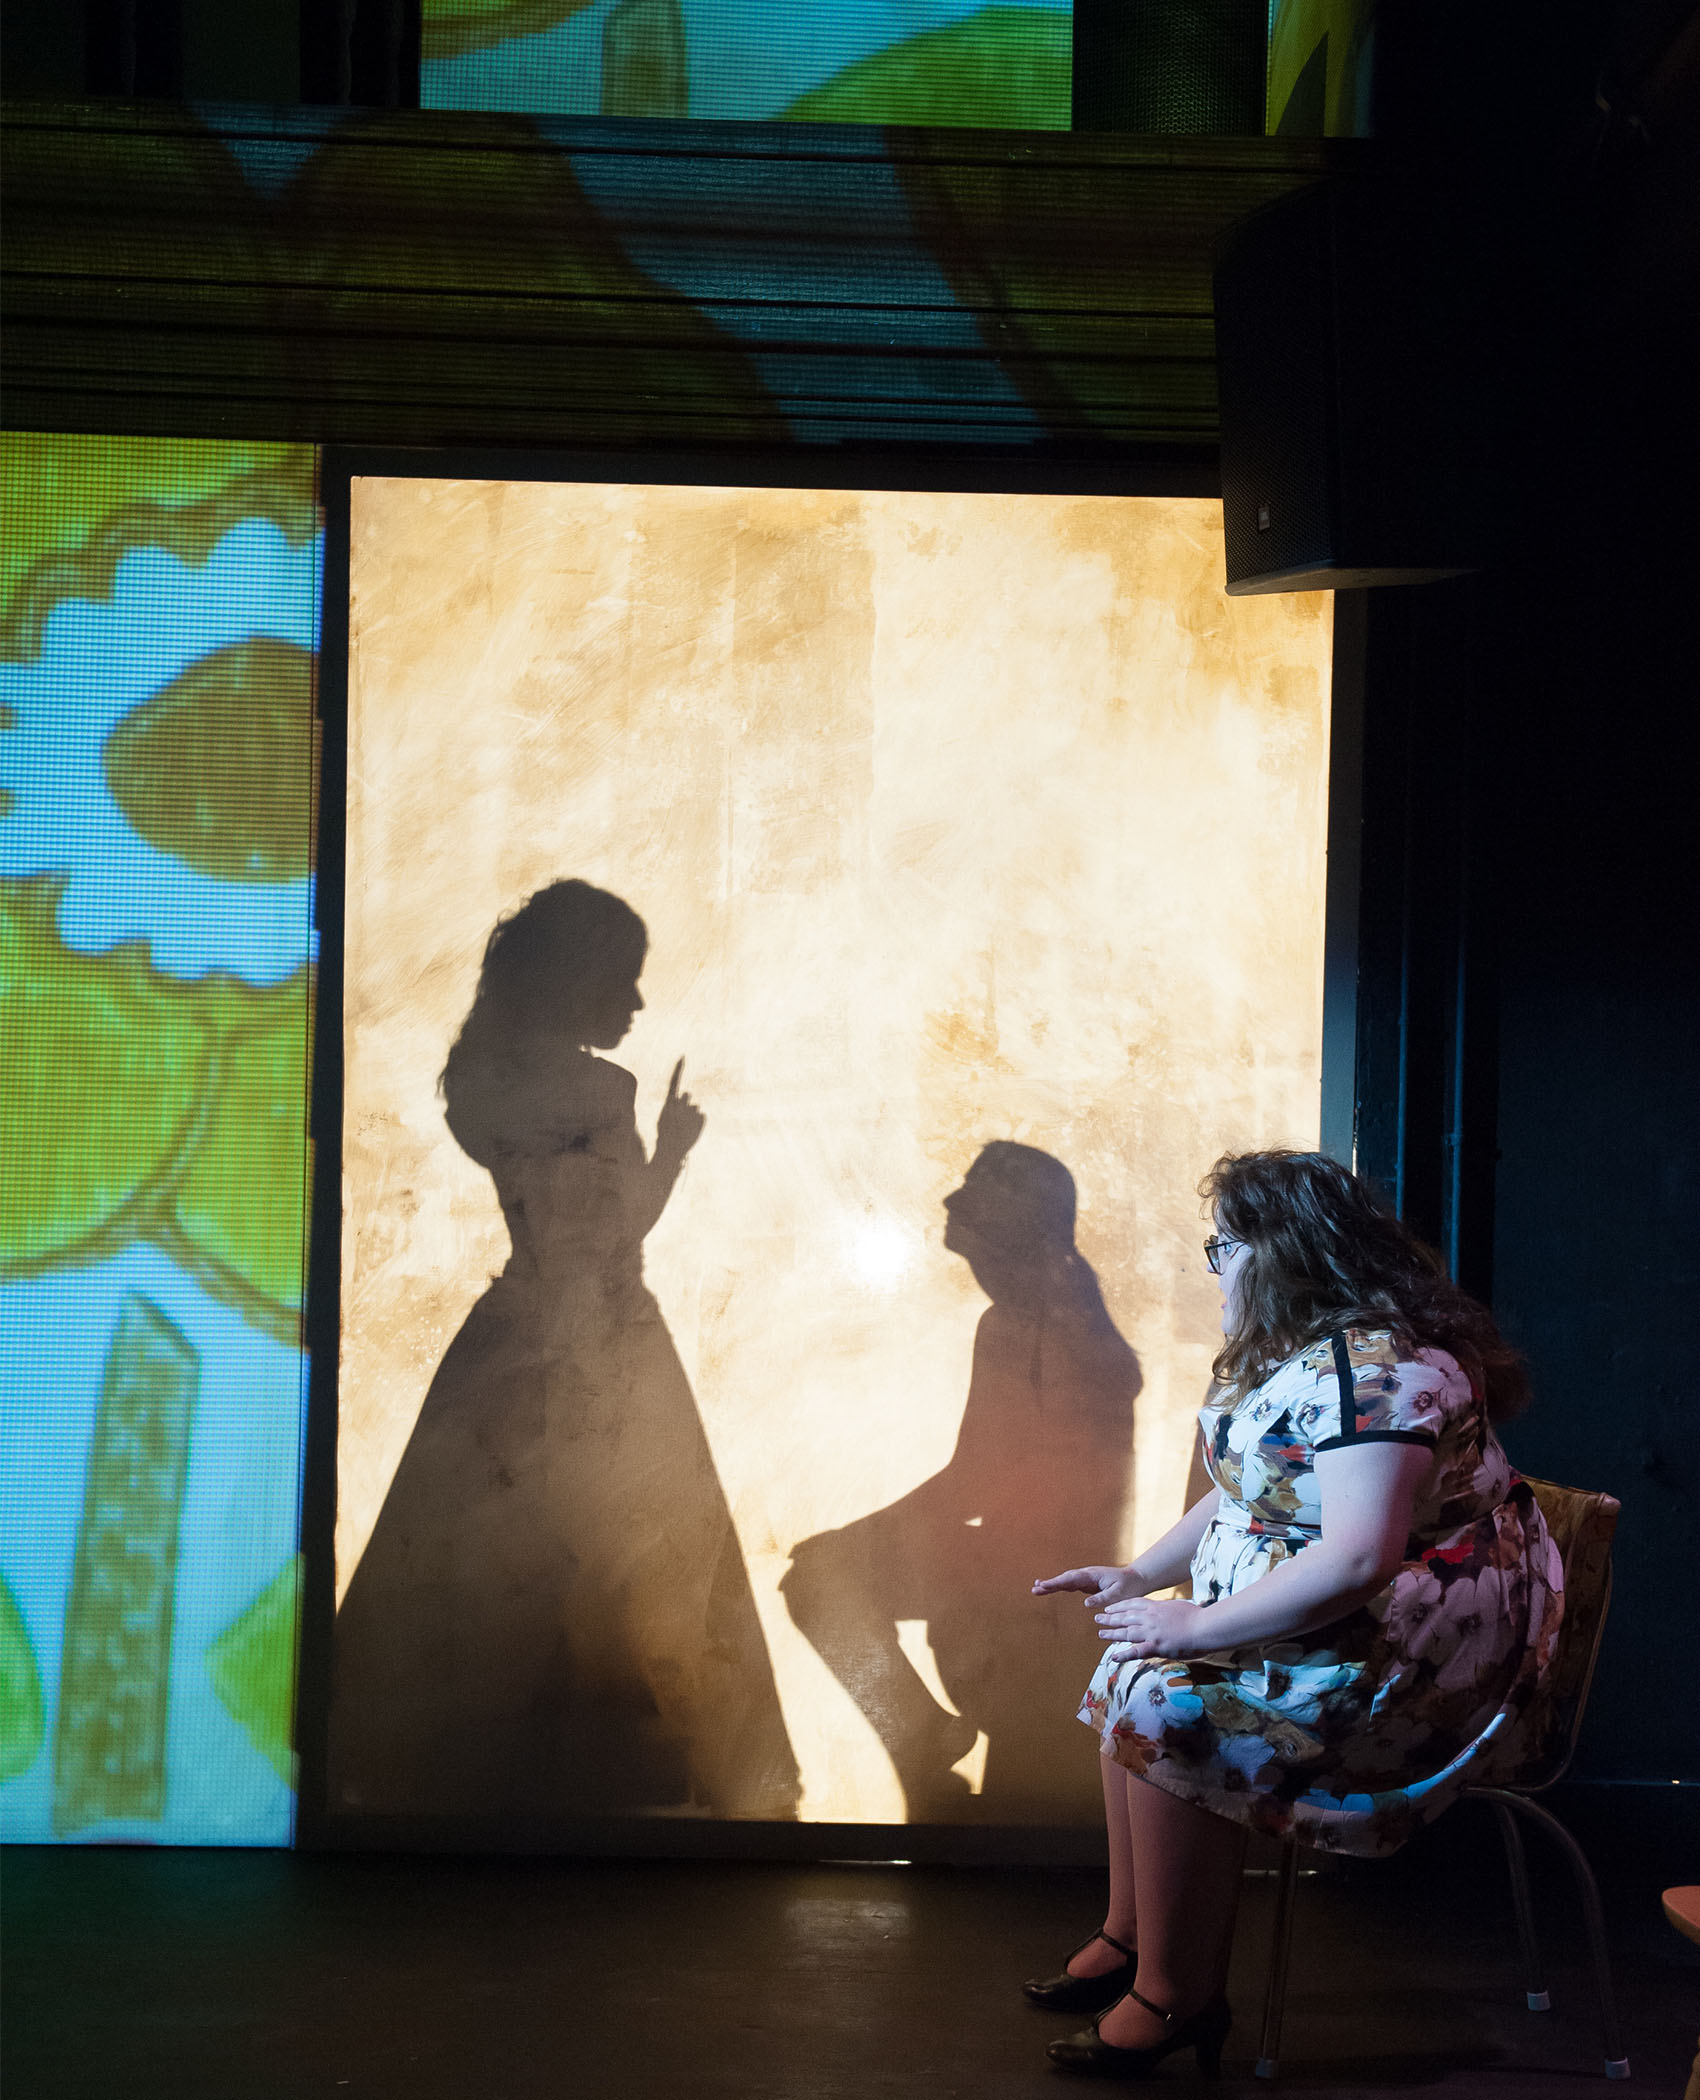 A young woman sitting in a chair looks tensely at a shadow screen, behind it are the silhouettes of a young woman in a dress, a finger to her lip in a hushing motion. The person she is hushing sits and looks up at her, their hair is held back in a ponytail.  Colorful screens are projected beside them. 